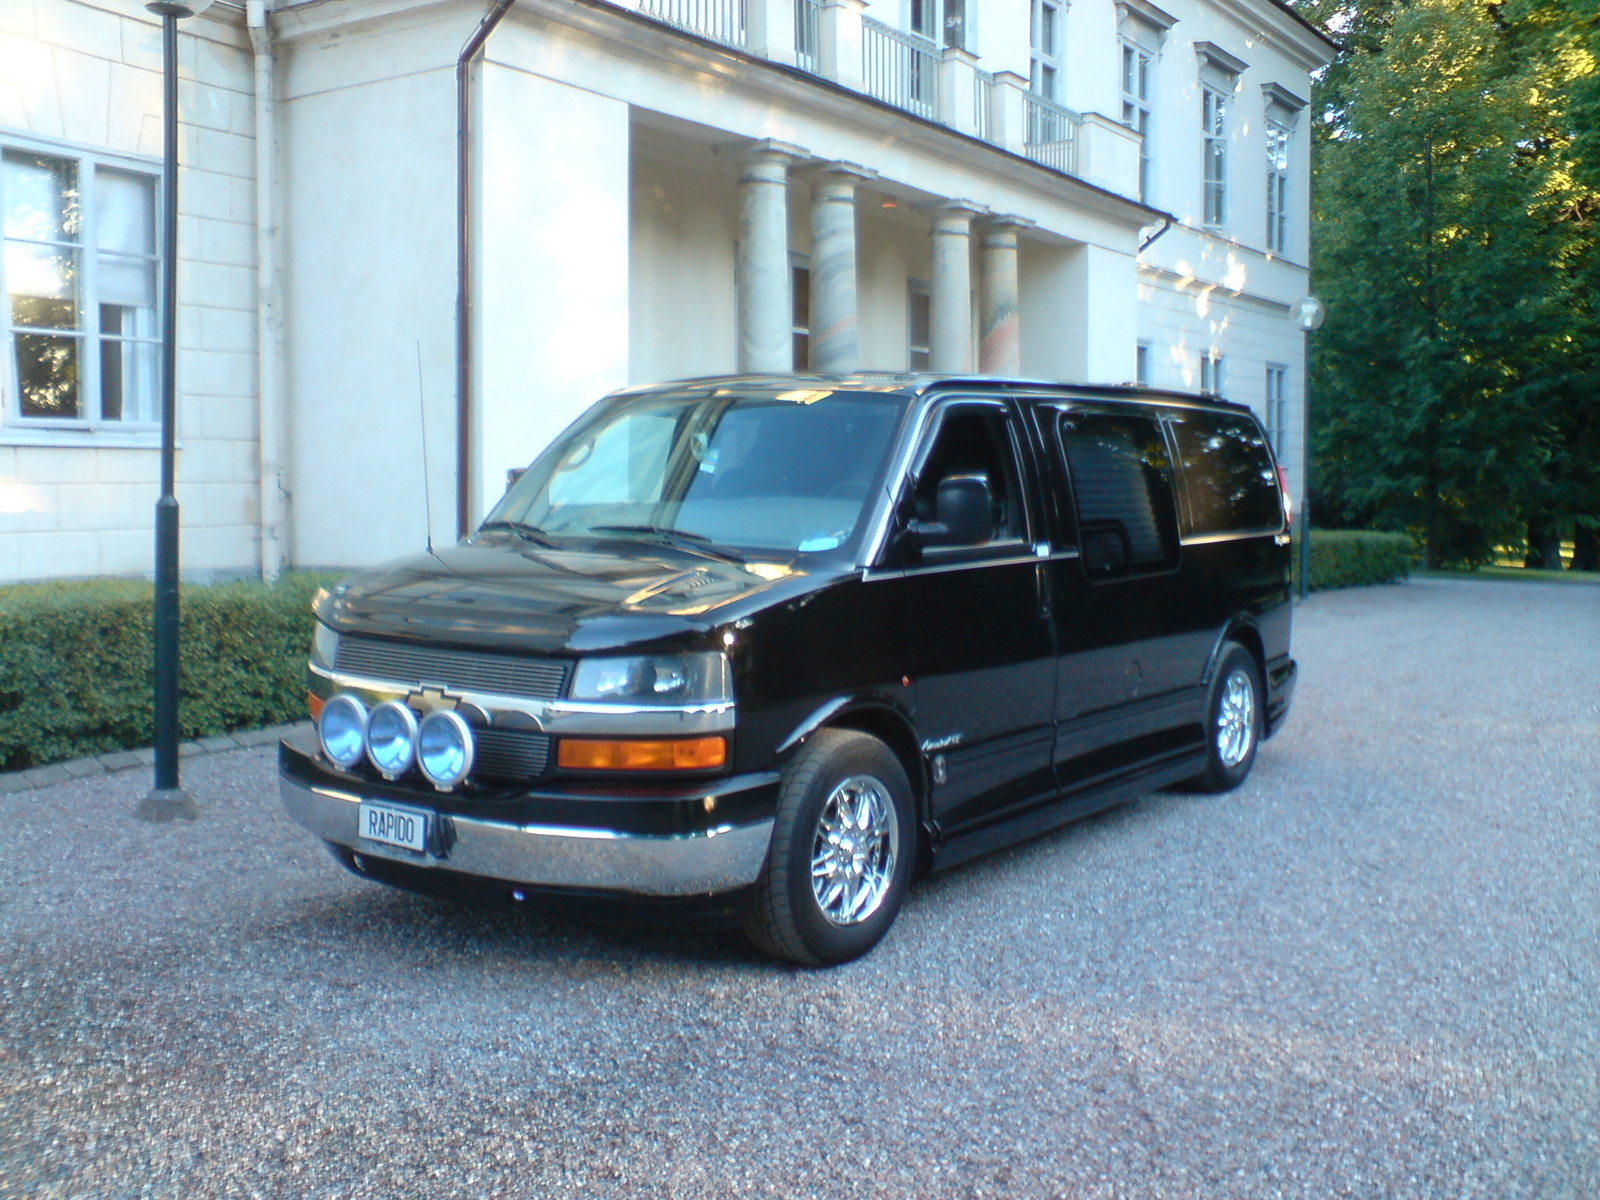 2007 Chevrolet Express: Prices, Reviews & Pictures - CarGurus